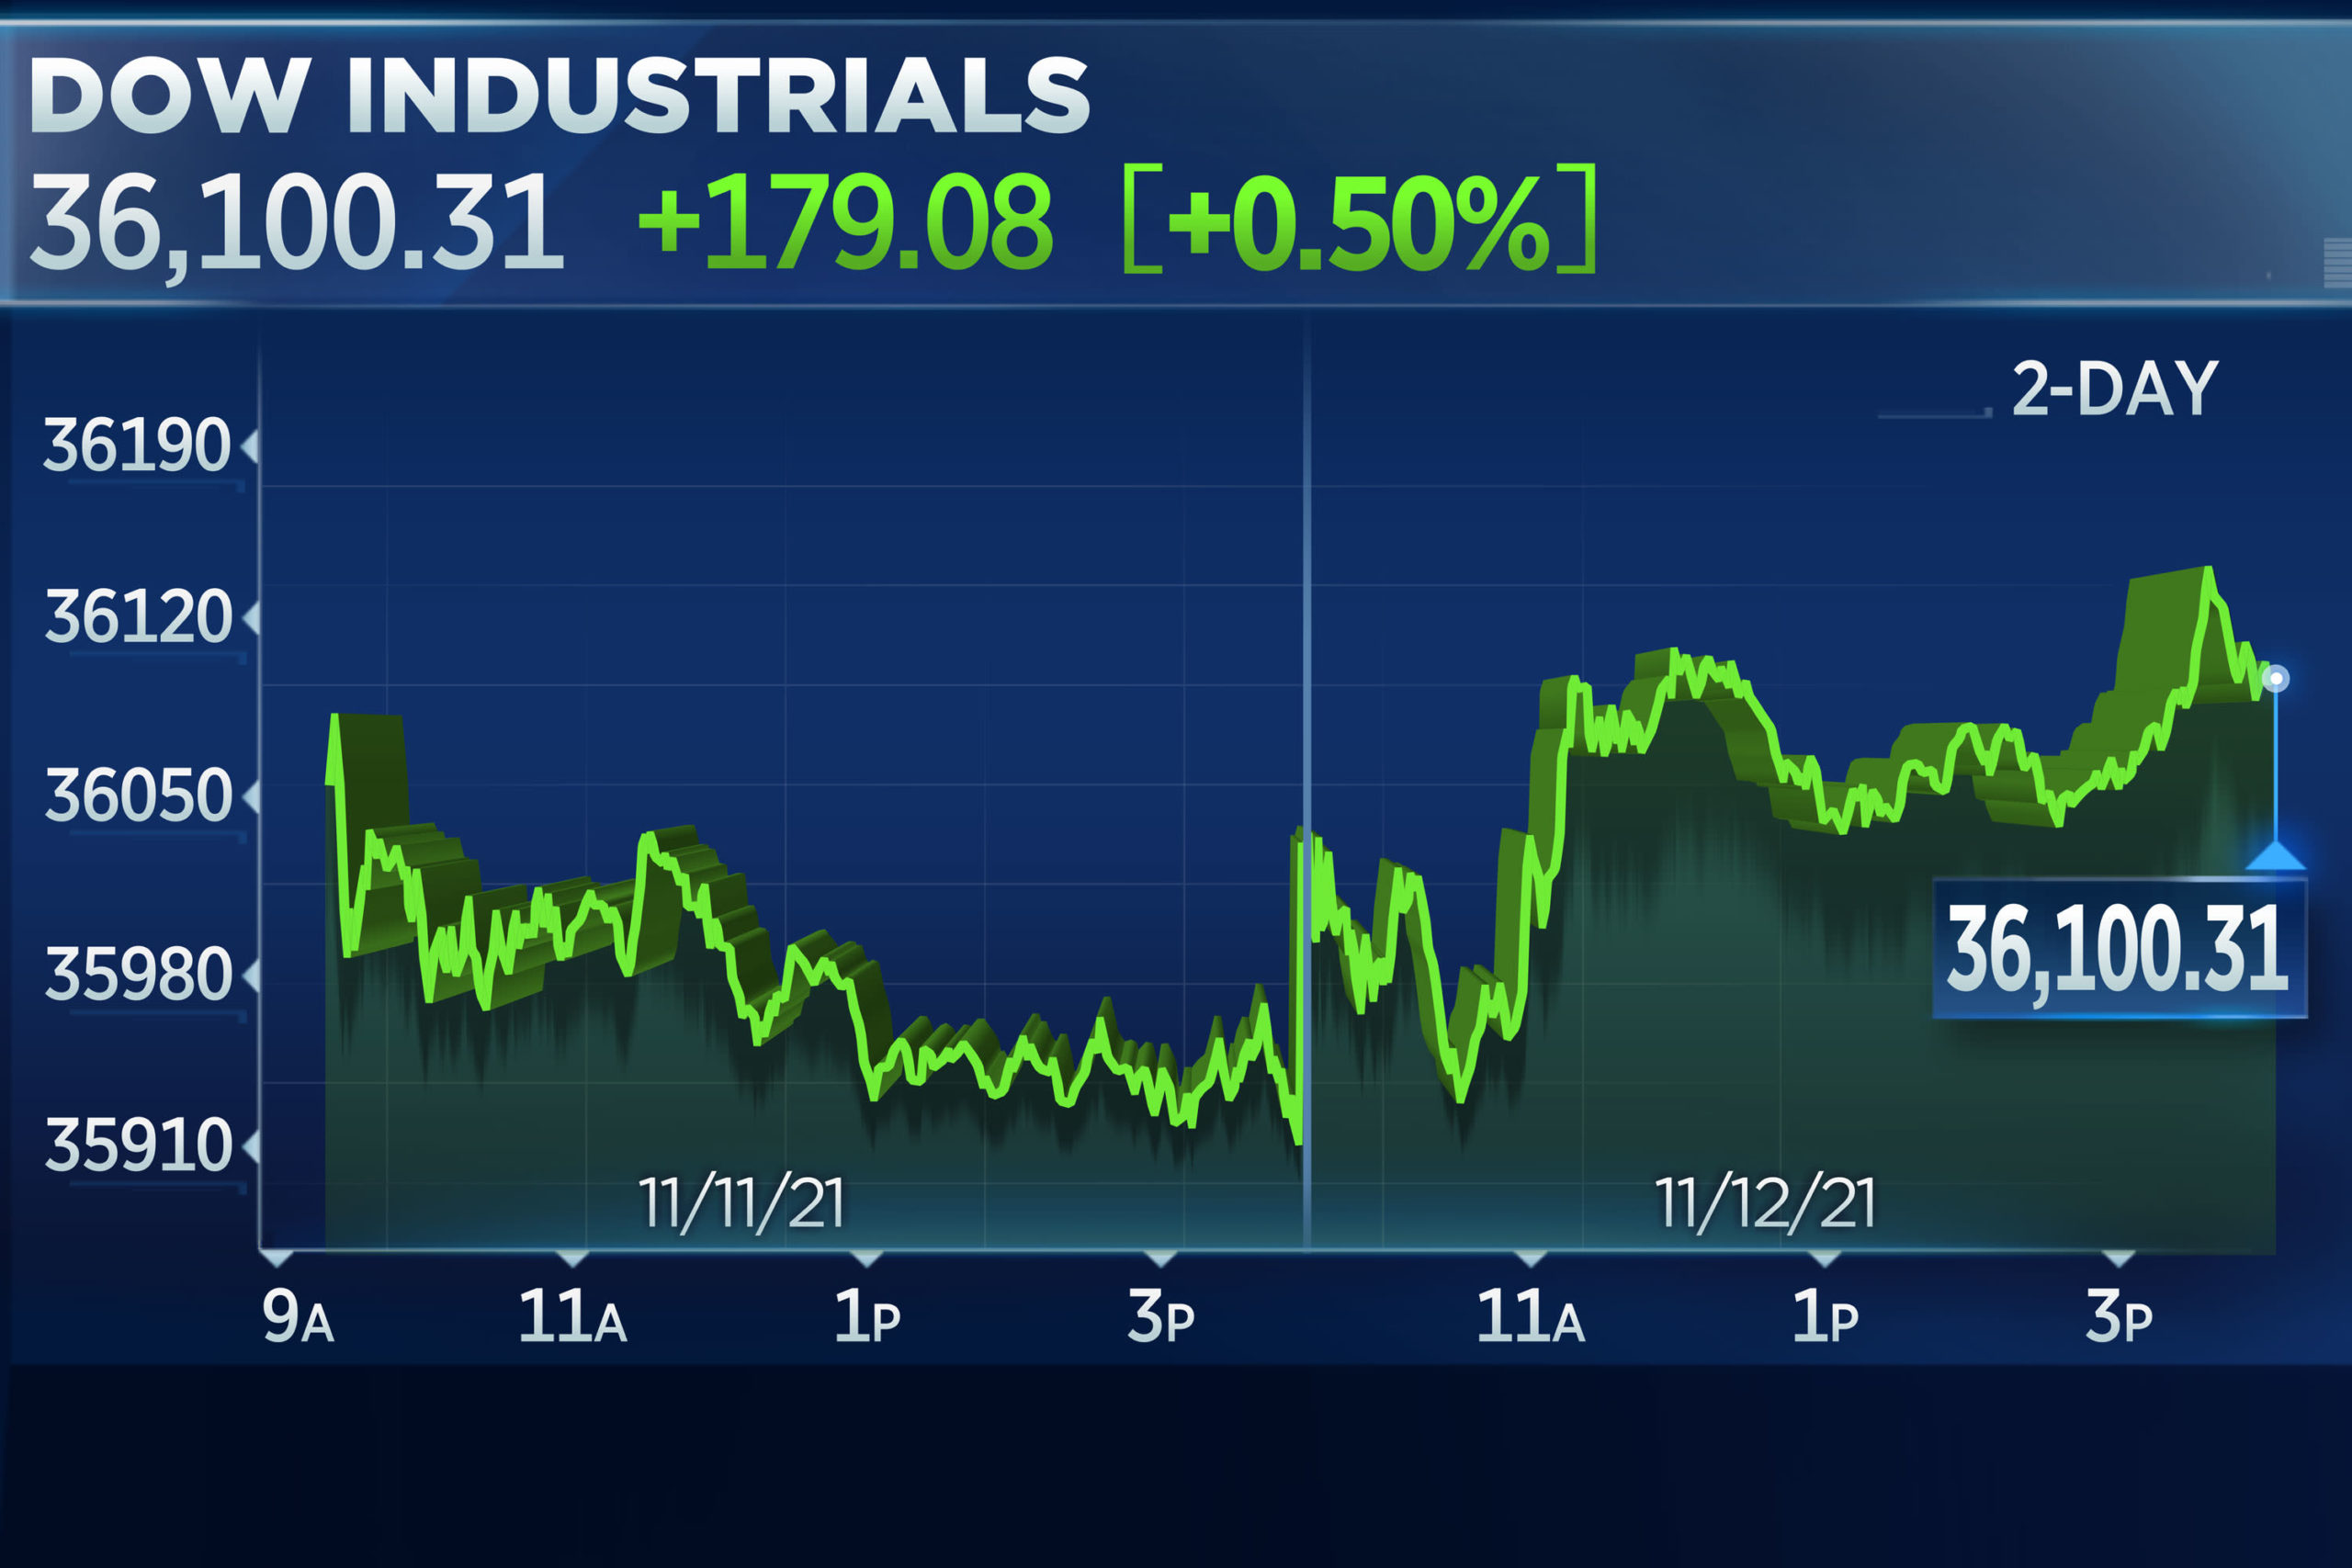 As the stock market continues to rebound, the Dow Jones Industrial Average rises